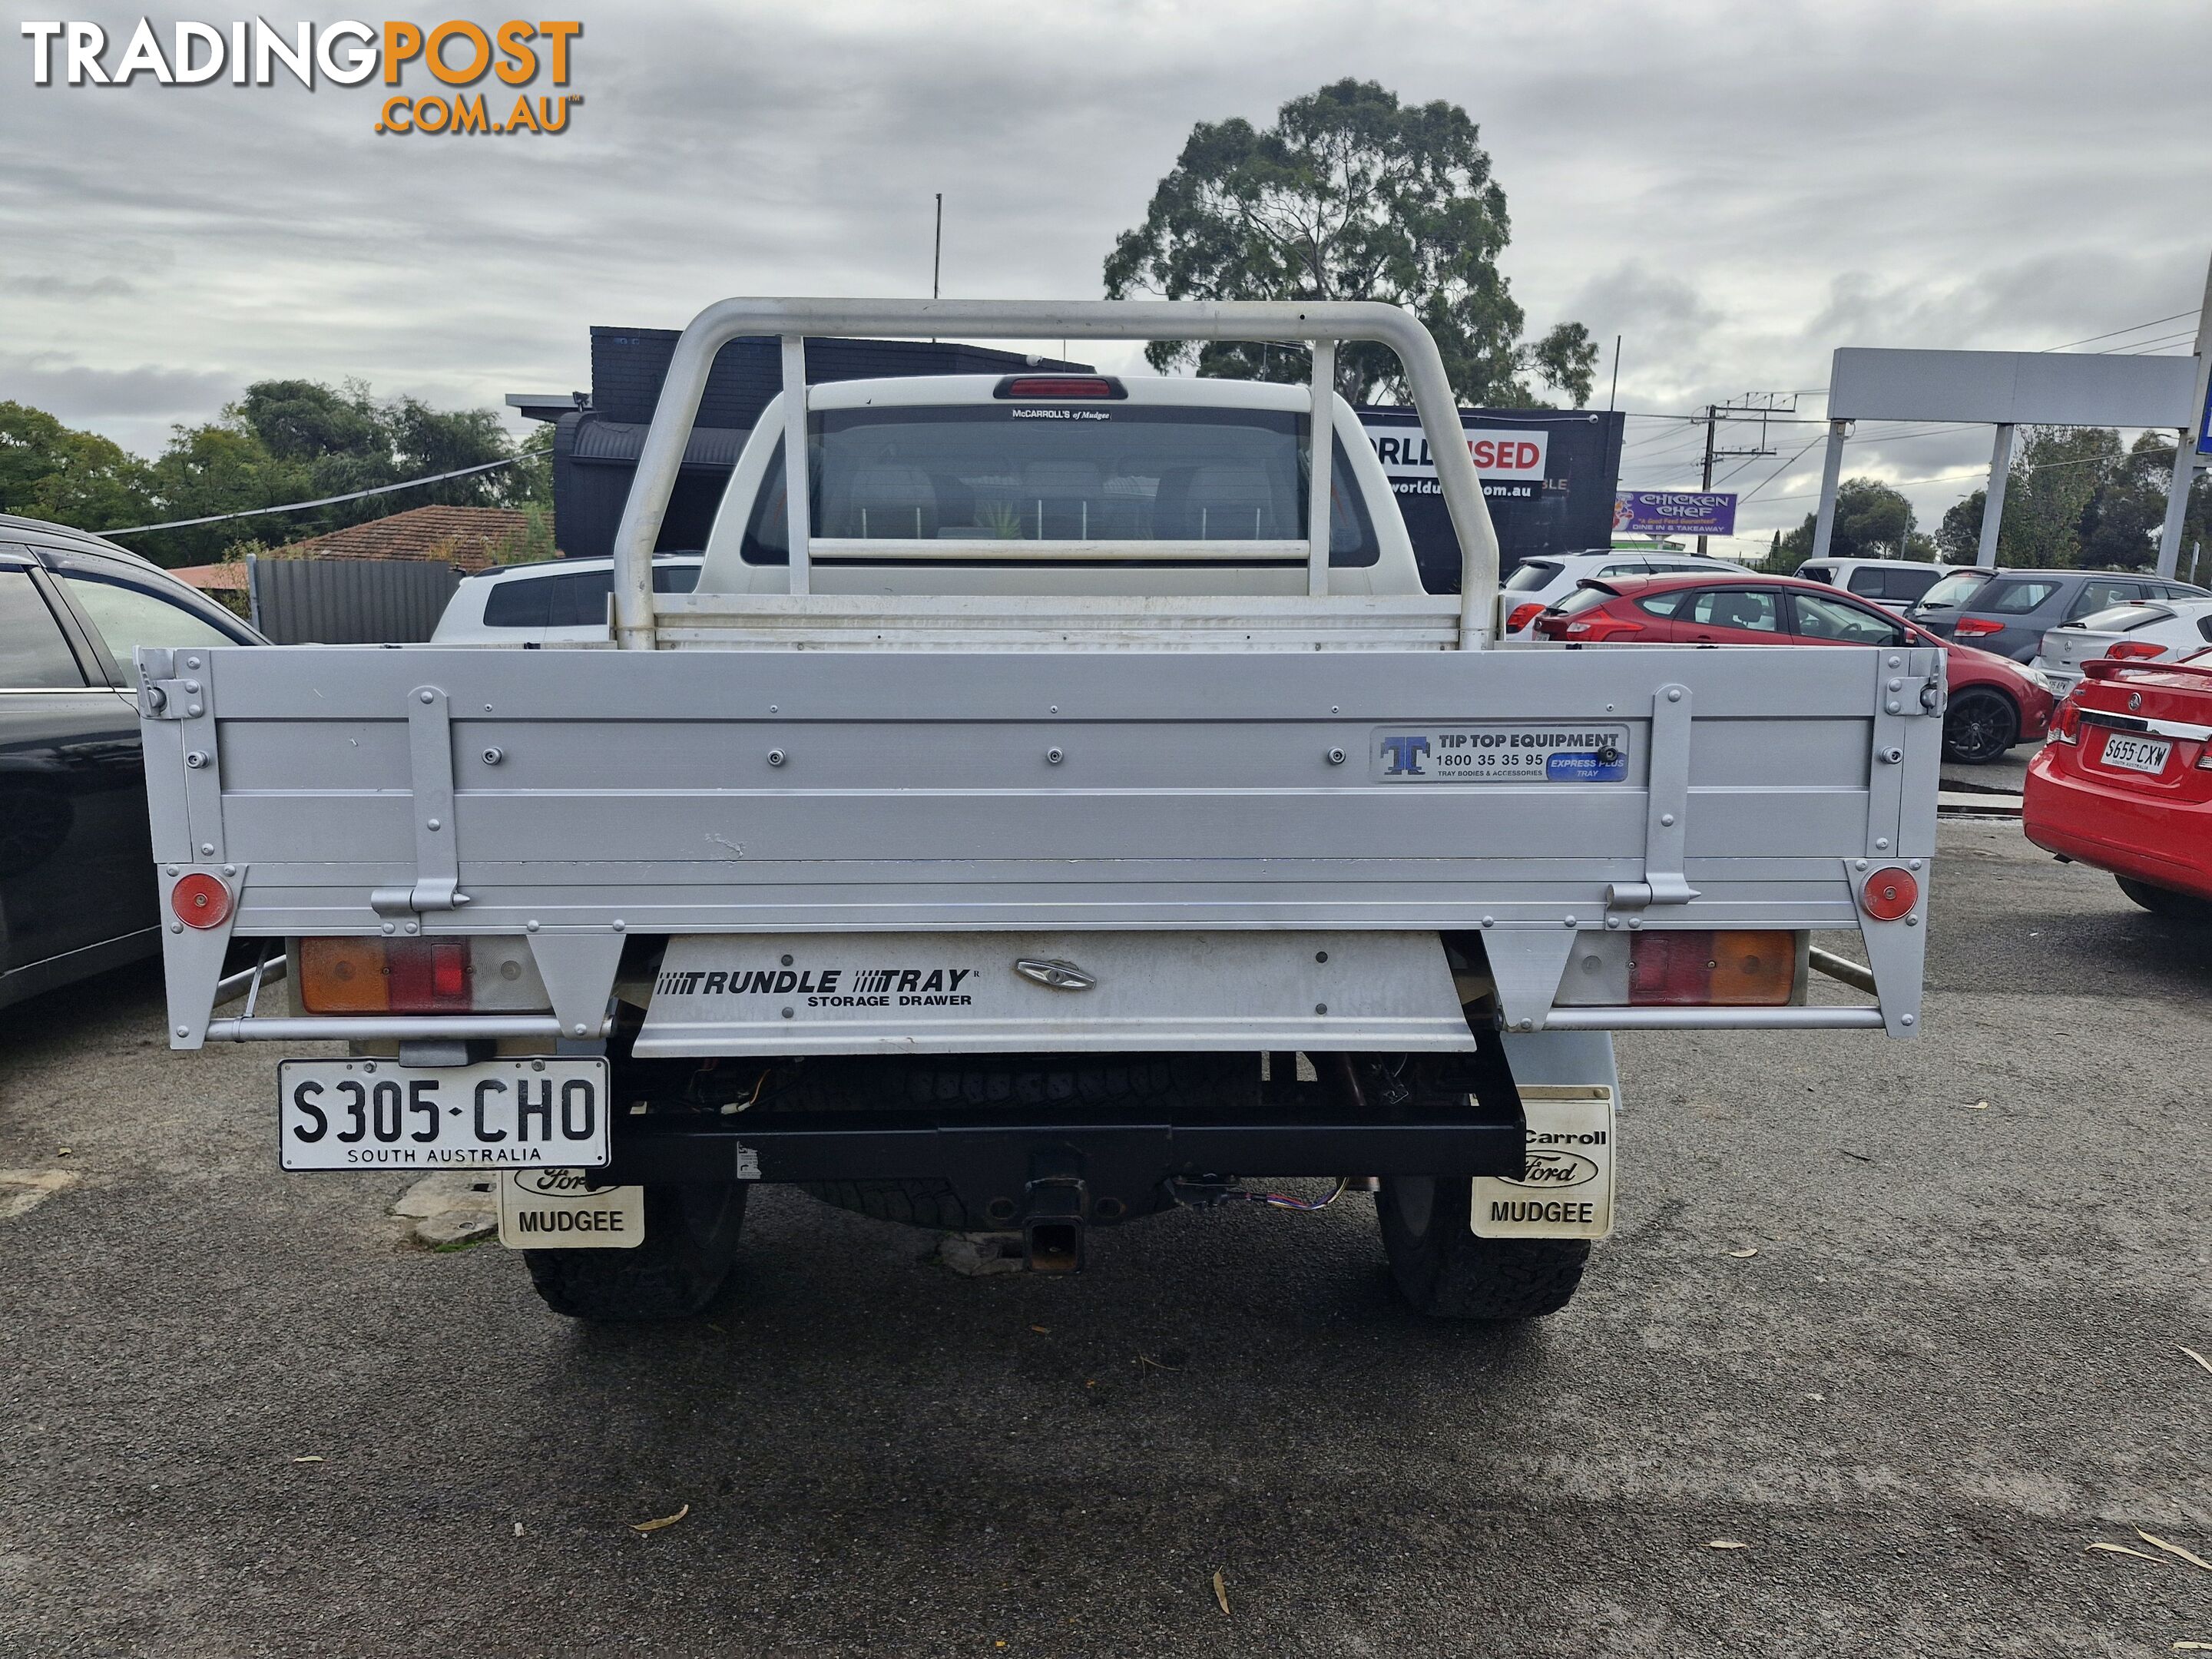 2014 Ford Ranger PX XLS 4X4 Ute Automatic